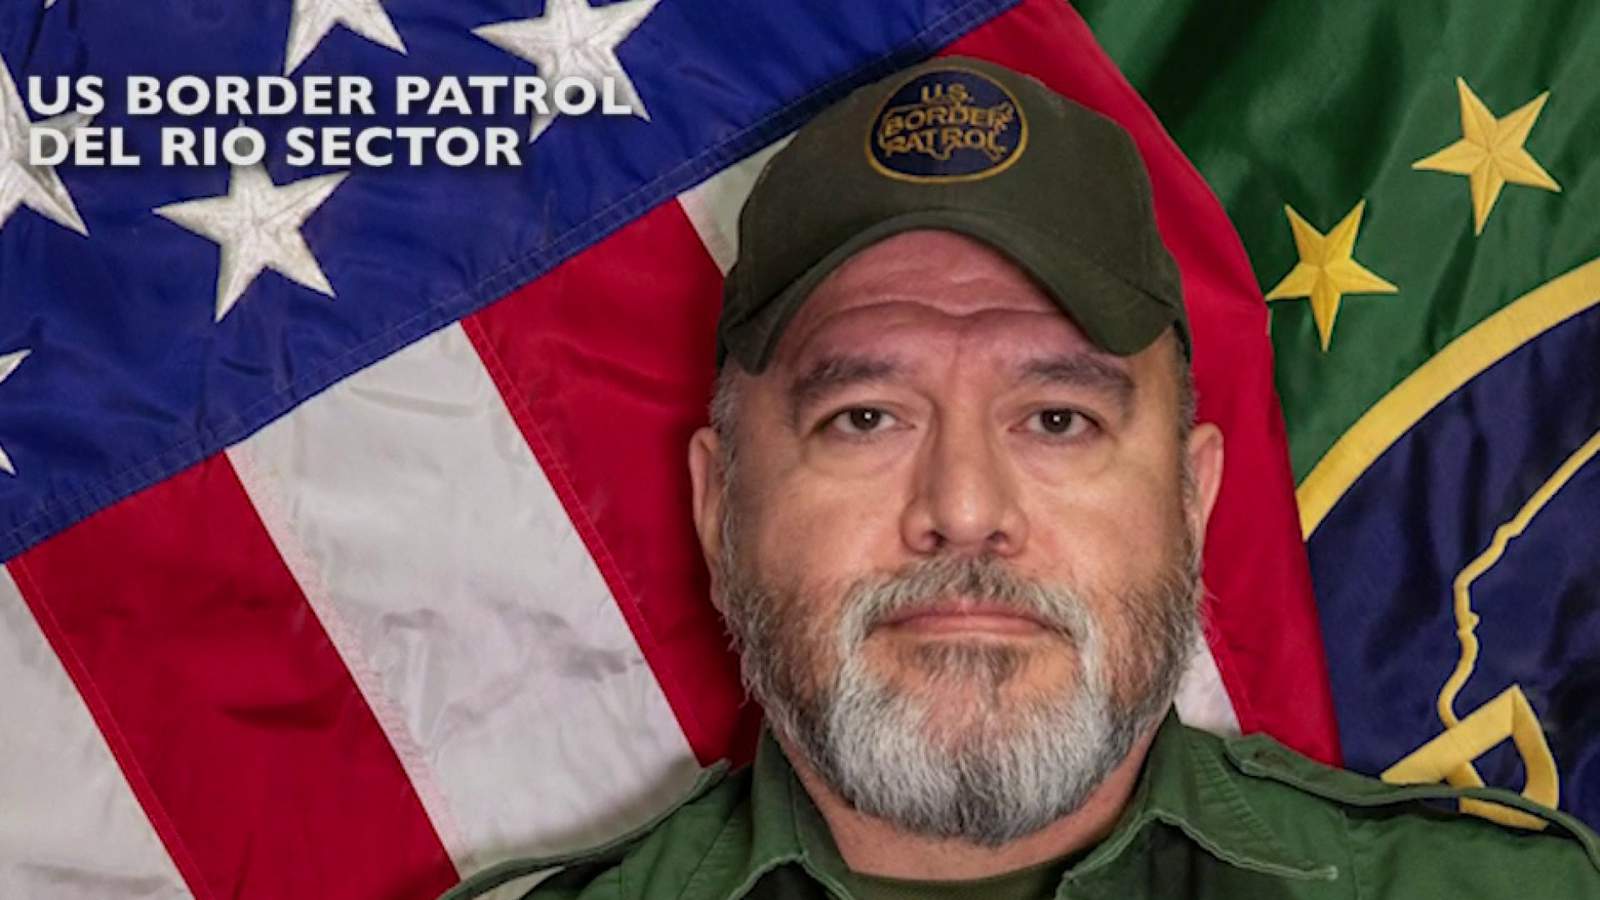 ‘A great man gone too soon’: Family mourns Border Patrol agent who died of COVID-19 complications